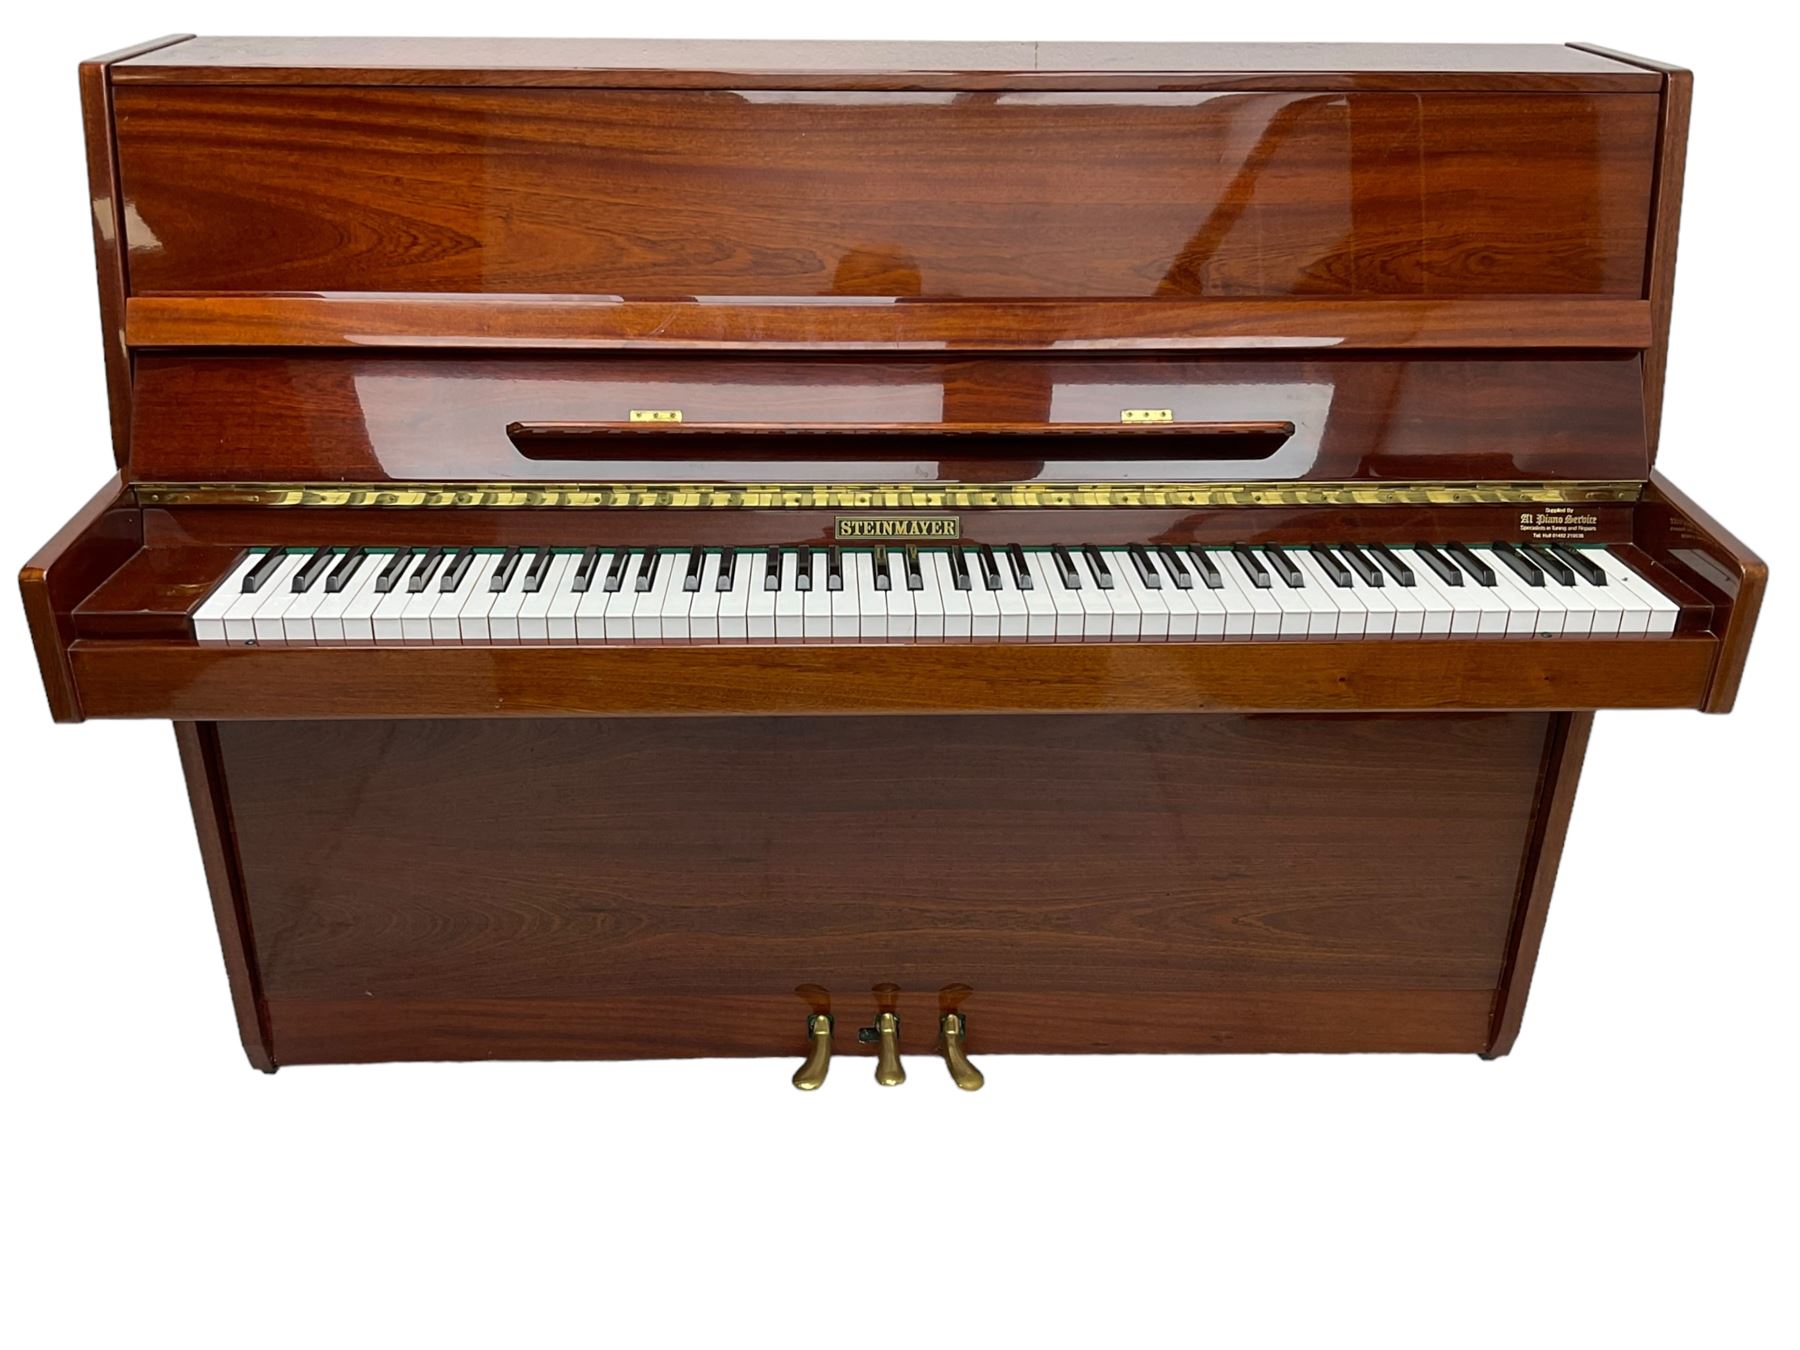 Steinmayer upright series 108 piano in sapele mahogany case - Image 3 of 11